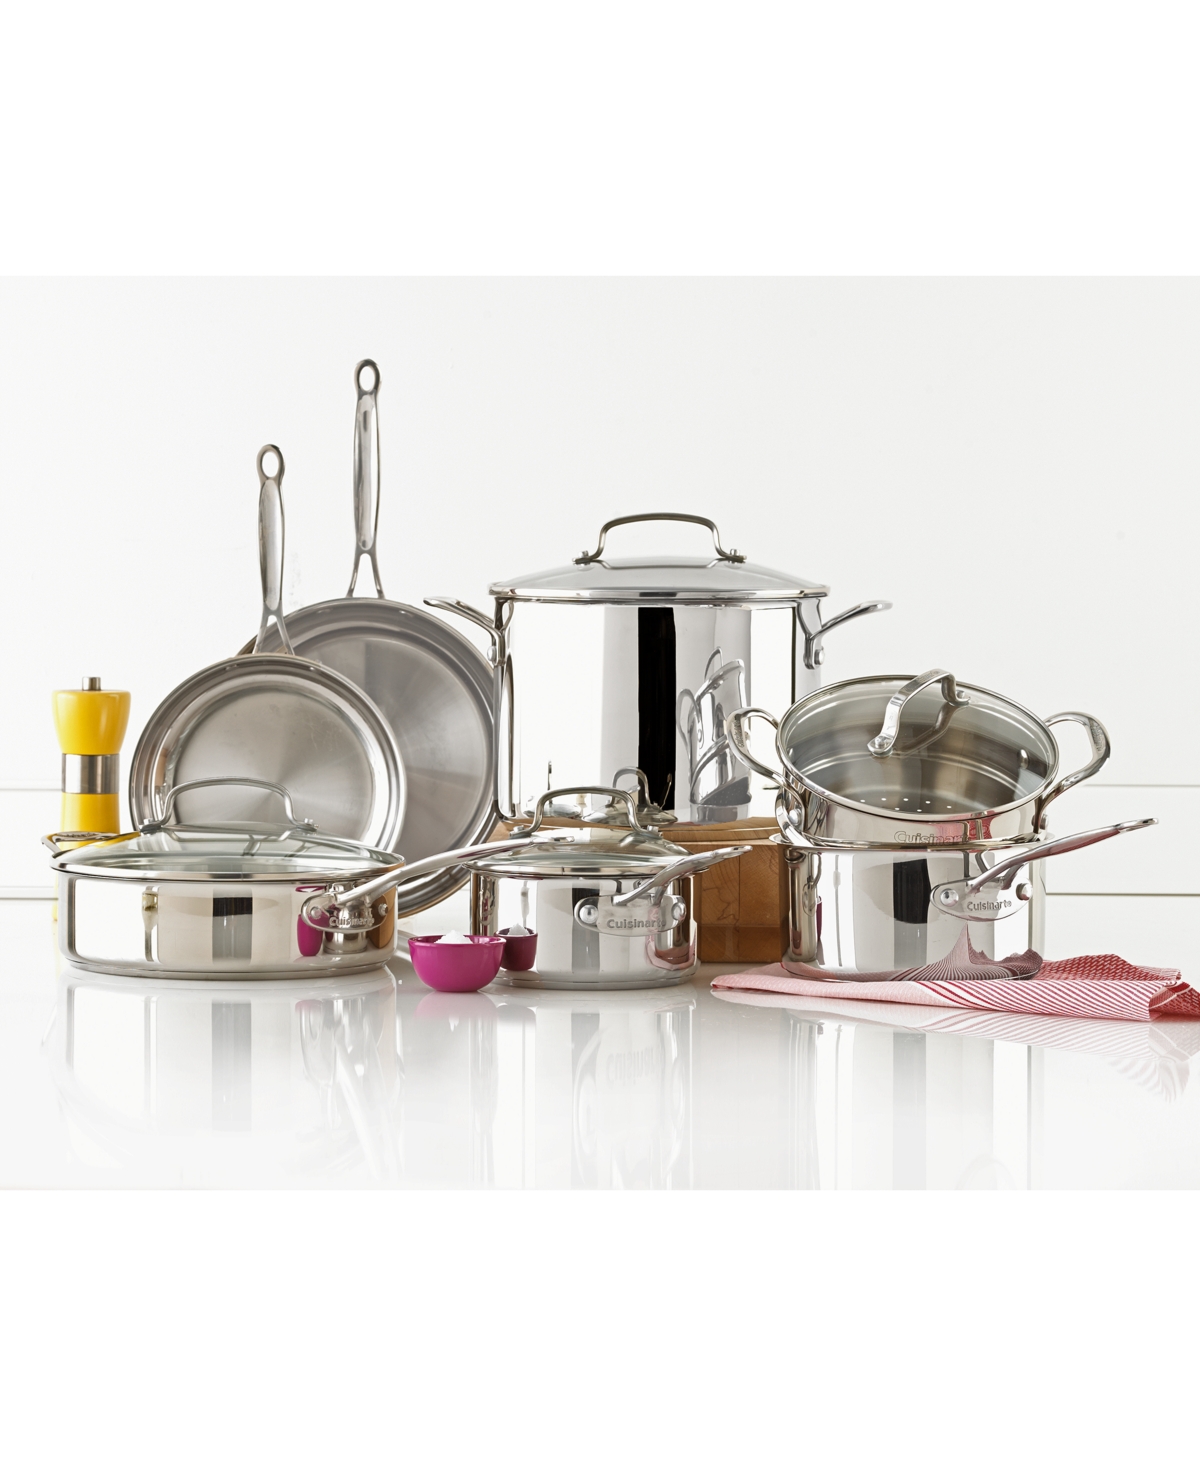 Cuisinart Pro Series Stainless Steel 11-pc. Cookware Set